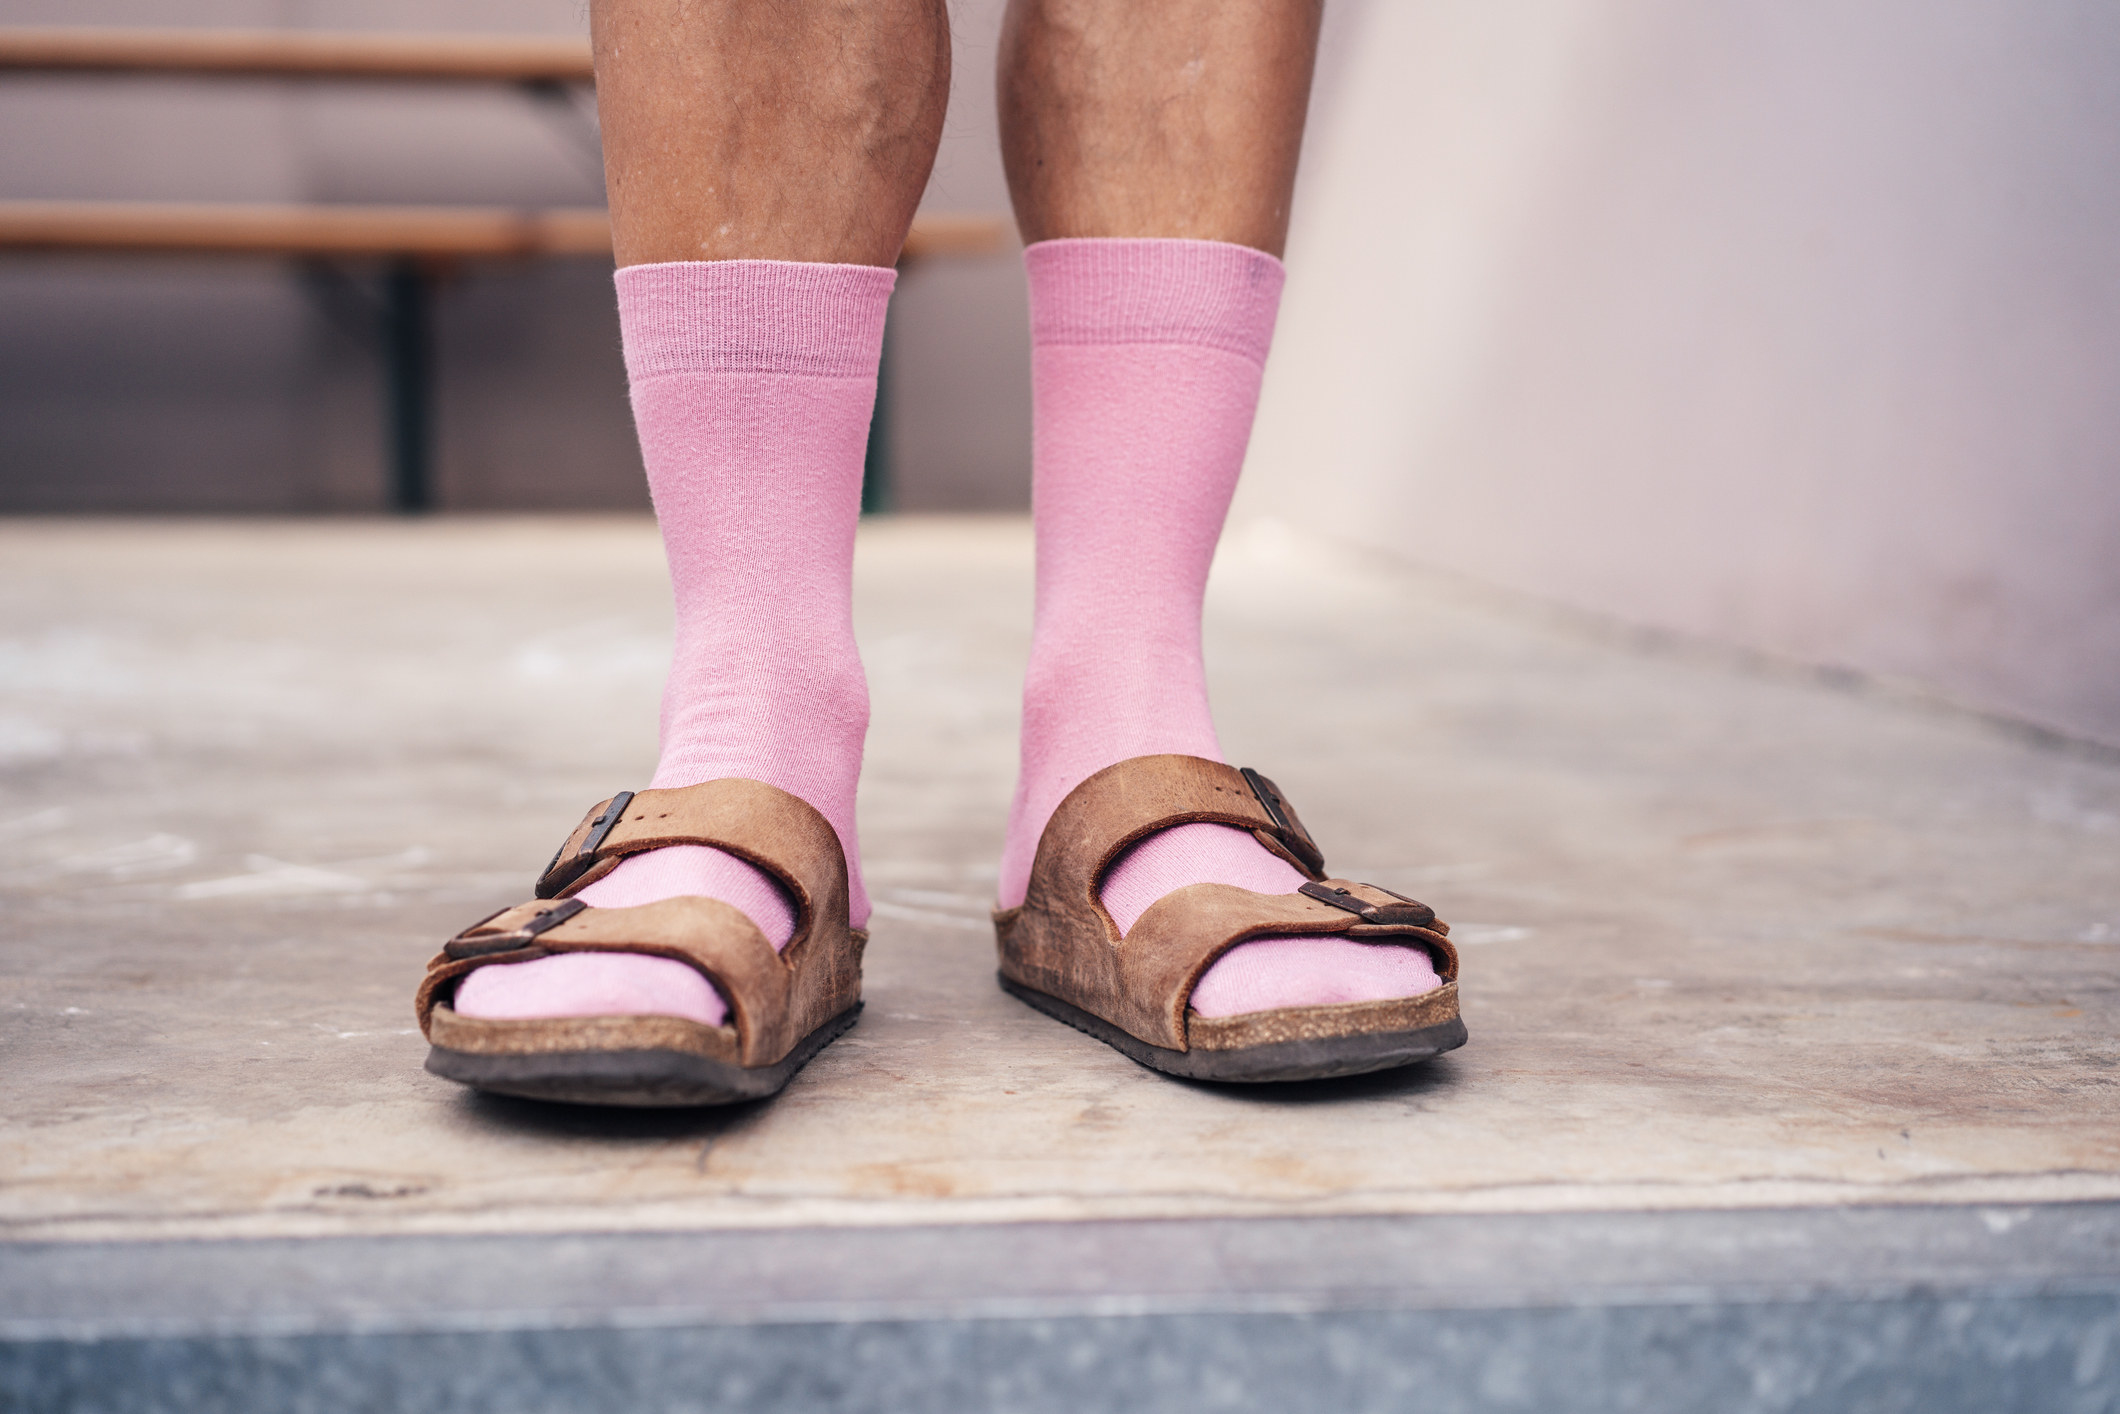 Person wearing a combination of pink socks and brown sandals. The person&#x27;s lower legs are visible